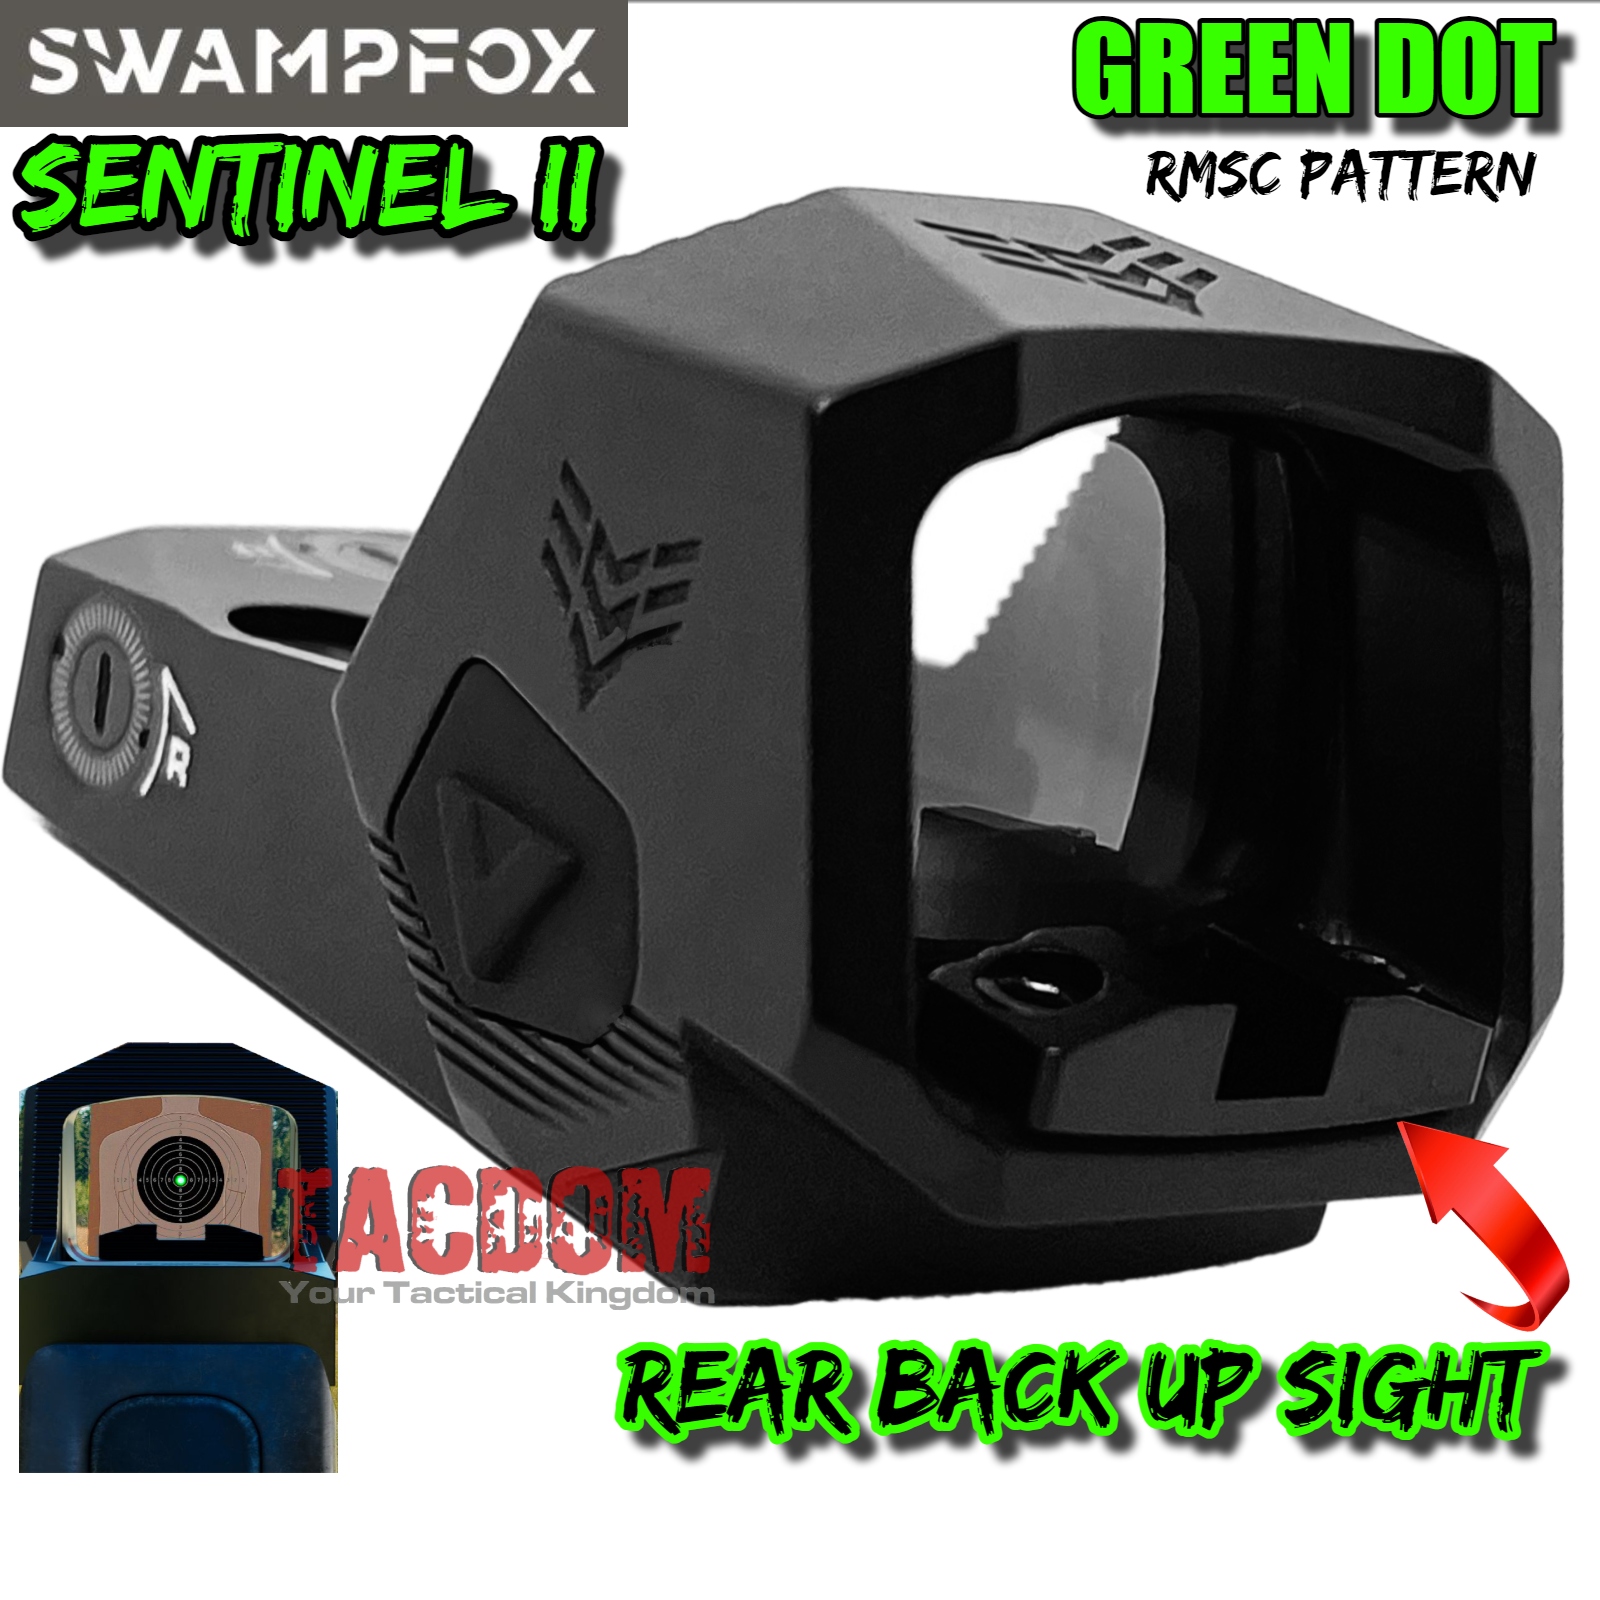 Swamp Fox SENTINEL II WITH BACK UP REAR SIGHT – GREEN DOT Optic 